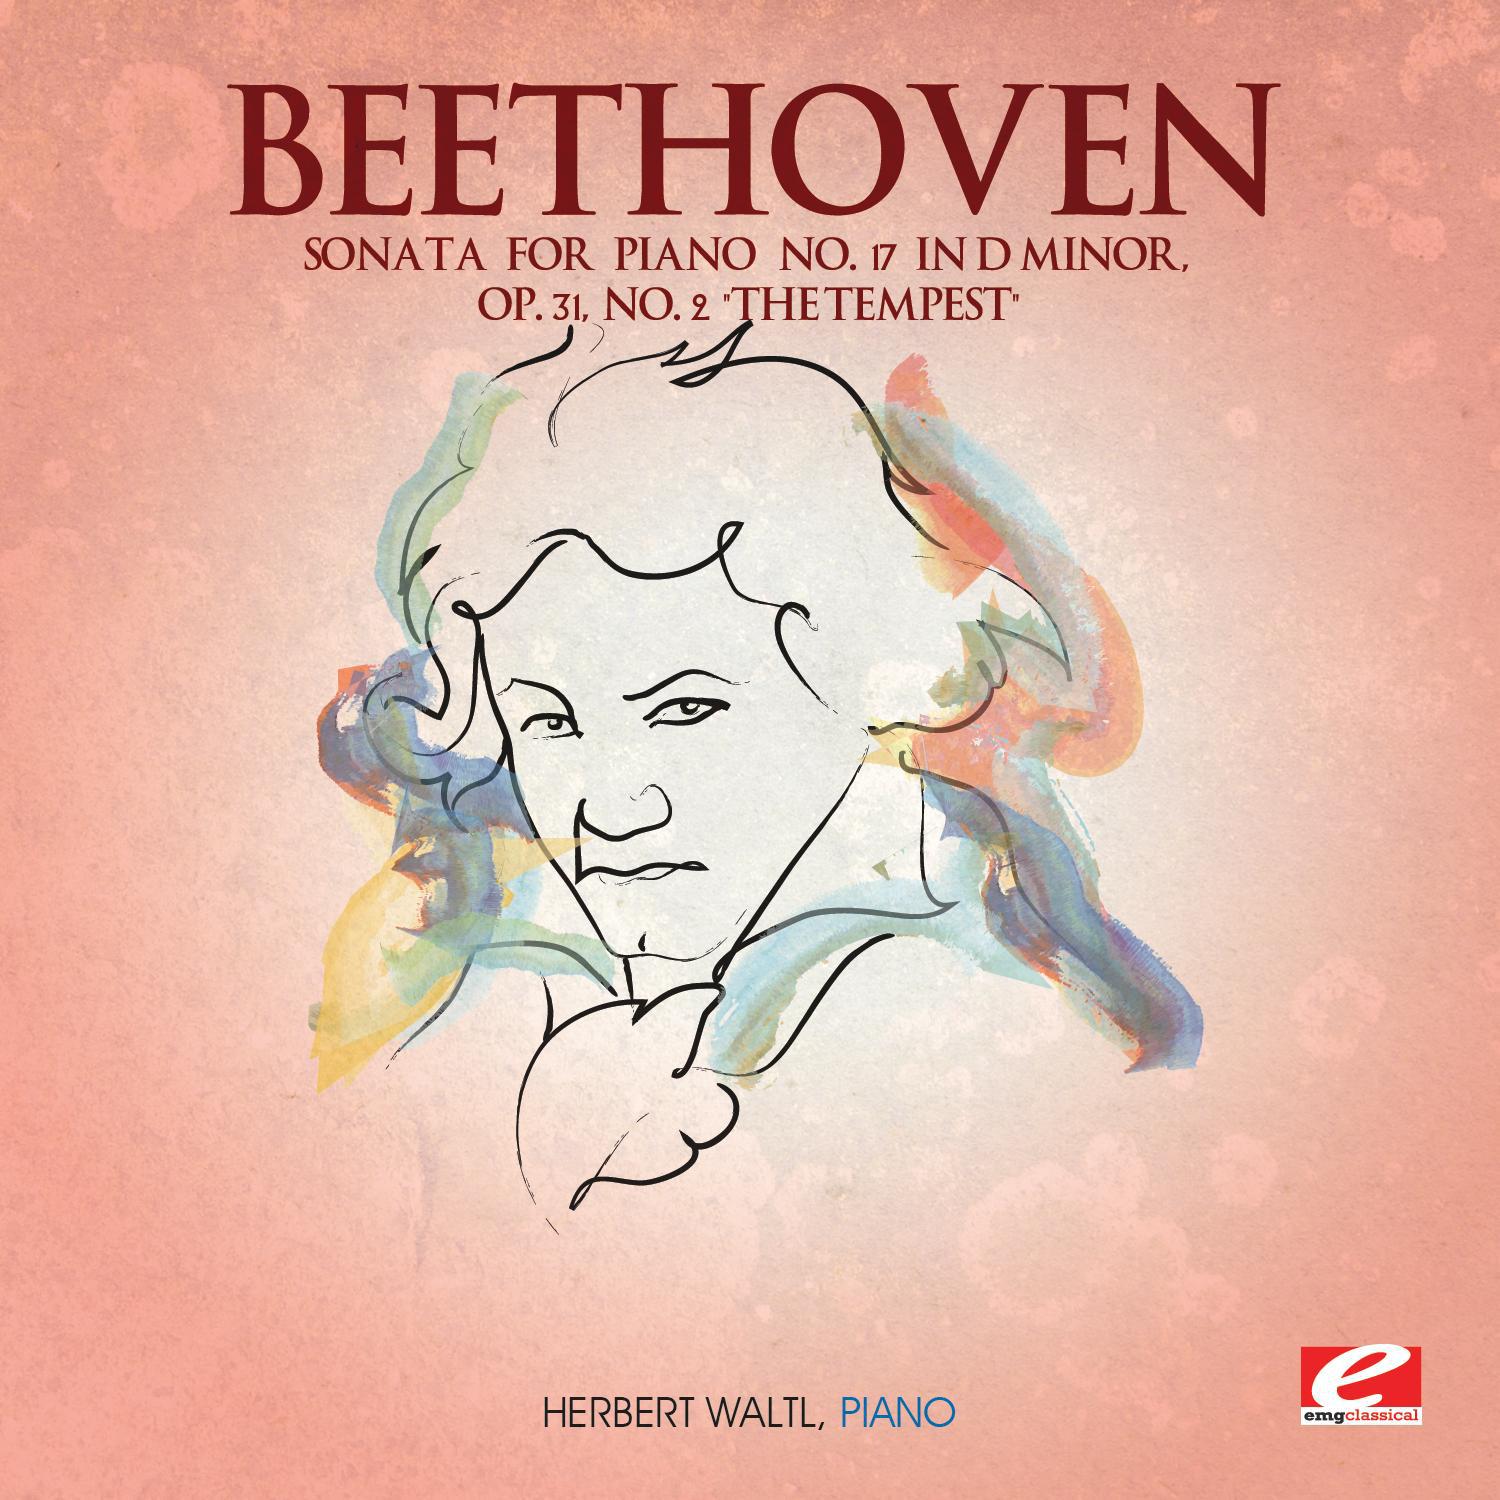 Beethoven: Sonata for Piano No. 17 in D Minor, Op. 31, No. 2 "The Tempest" (Digitally Remastered)